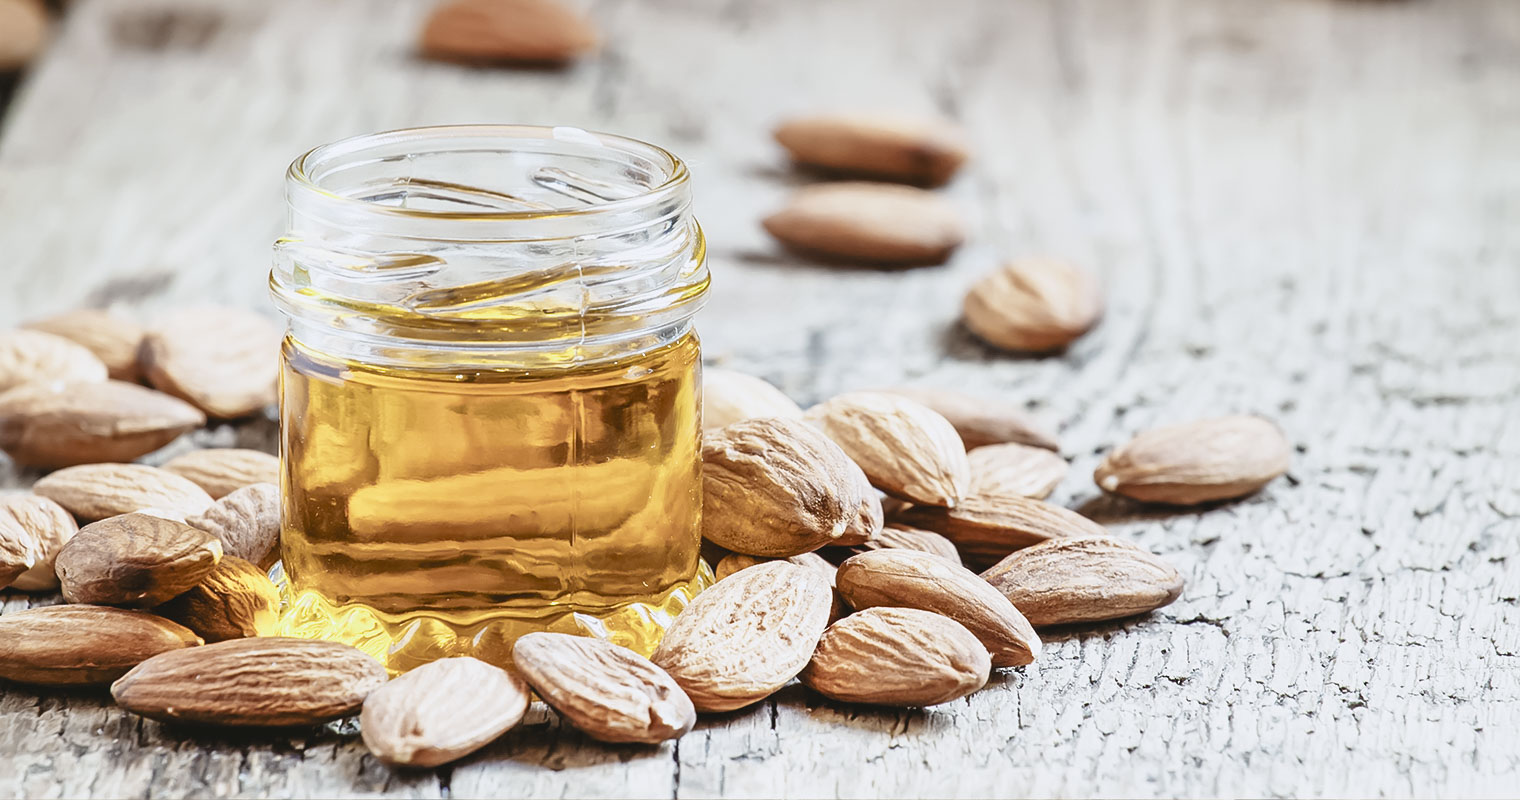 Sweet Almond Oil, first extraction, in a small glass jar, dry almond nuts on an old wooden background